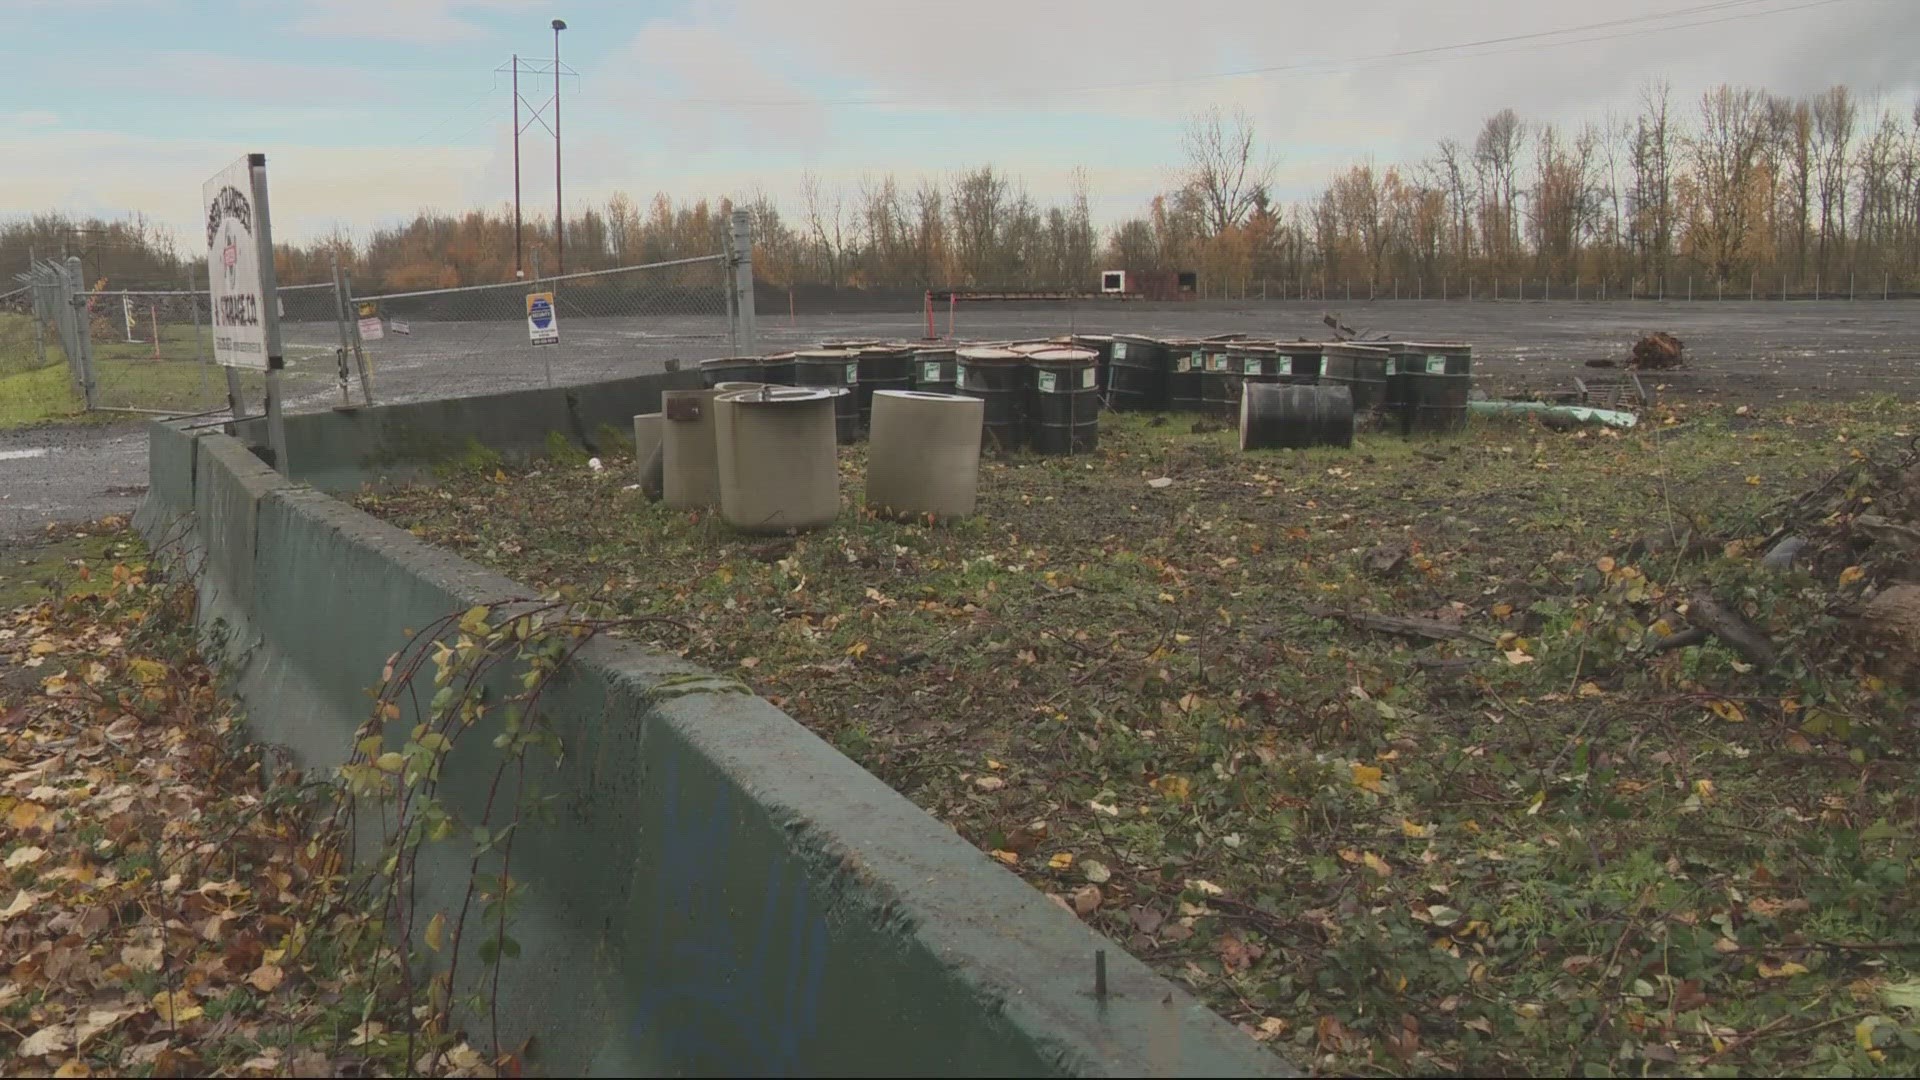 The abandoned lot in North Portland that will soon house nearly 200 homeless people has a decades-long history of soil contamination, according to the DEQ.